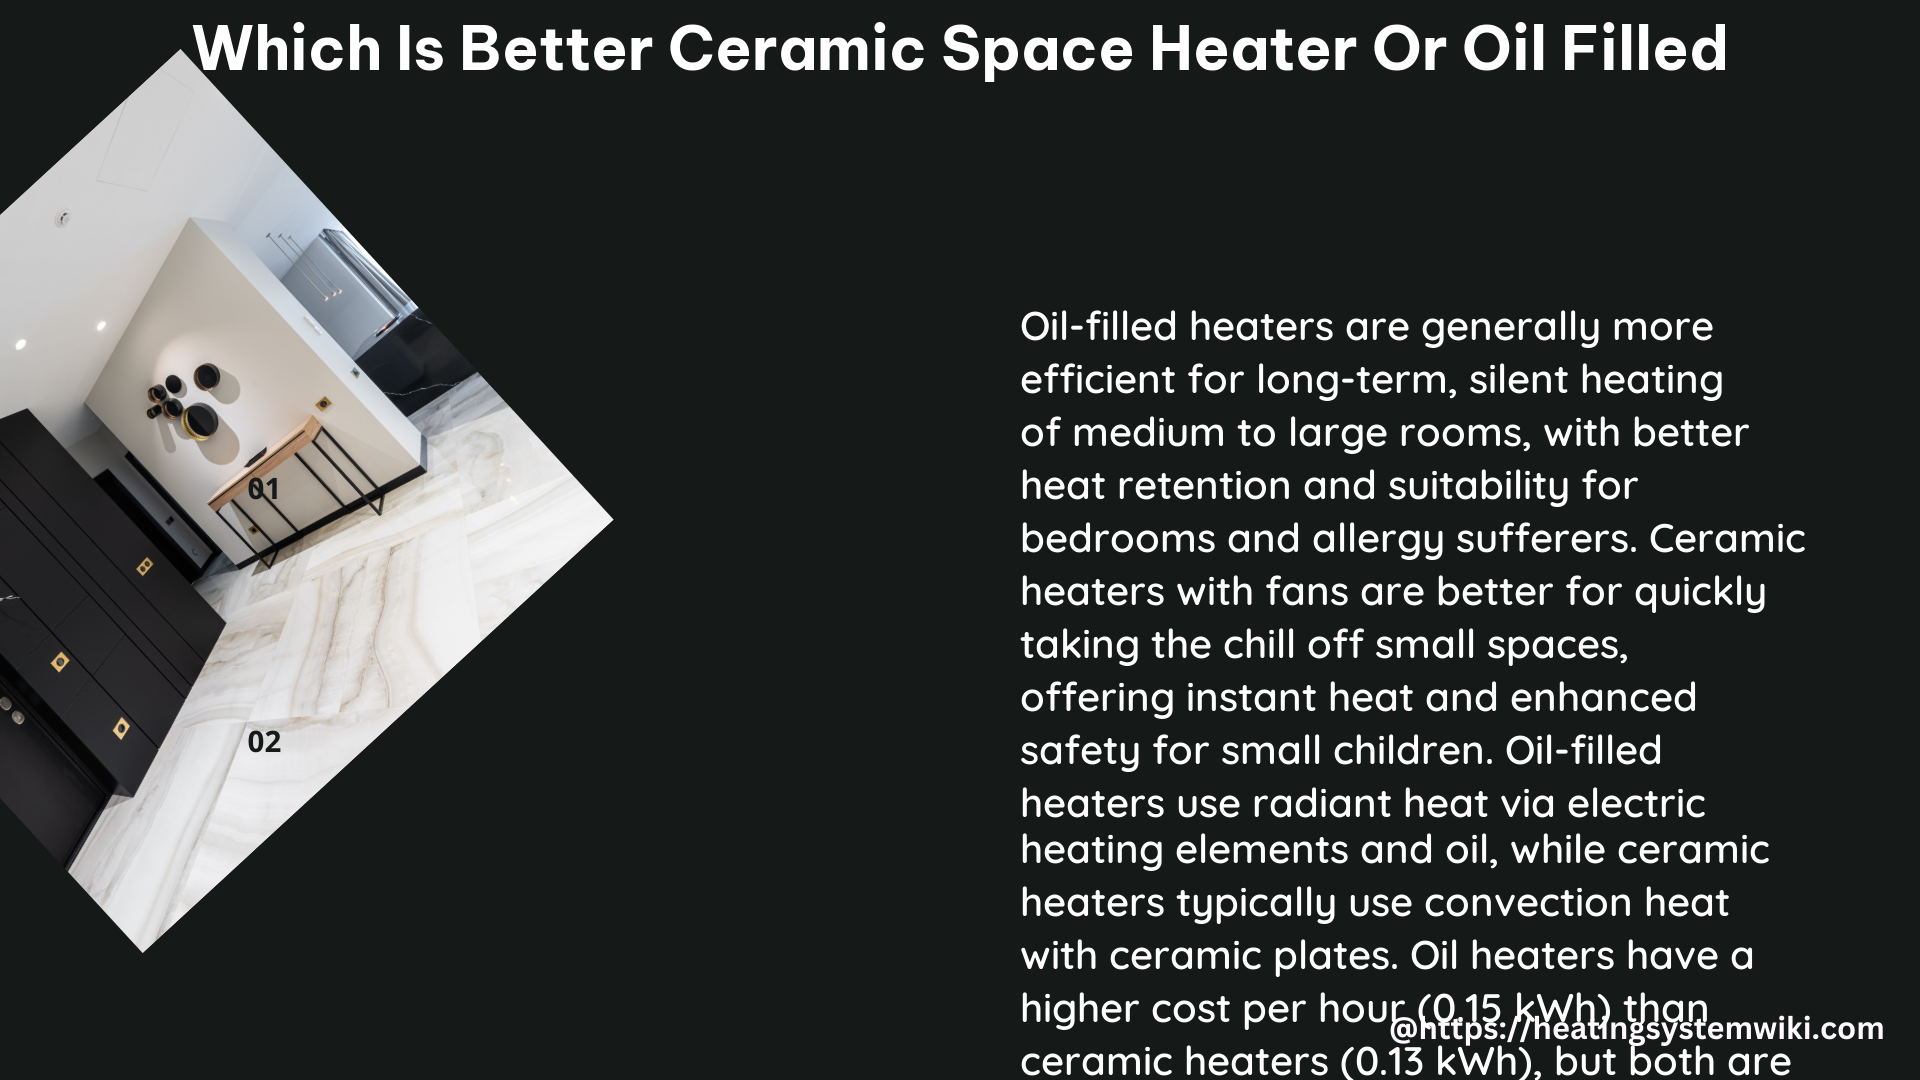 which is better ceramic space heater or oil filled